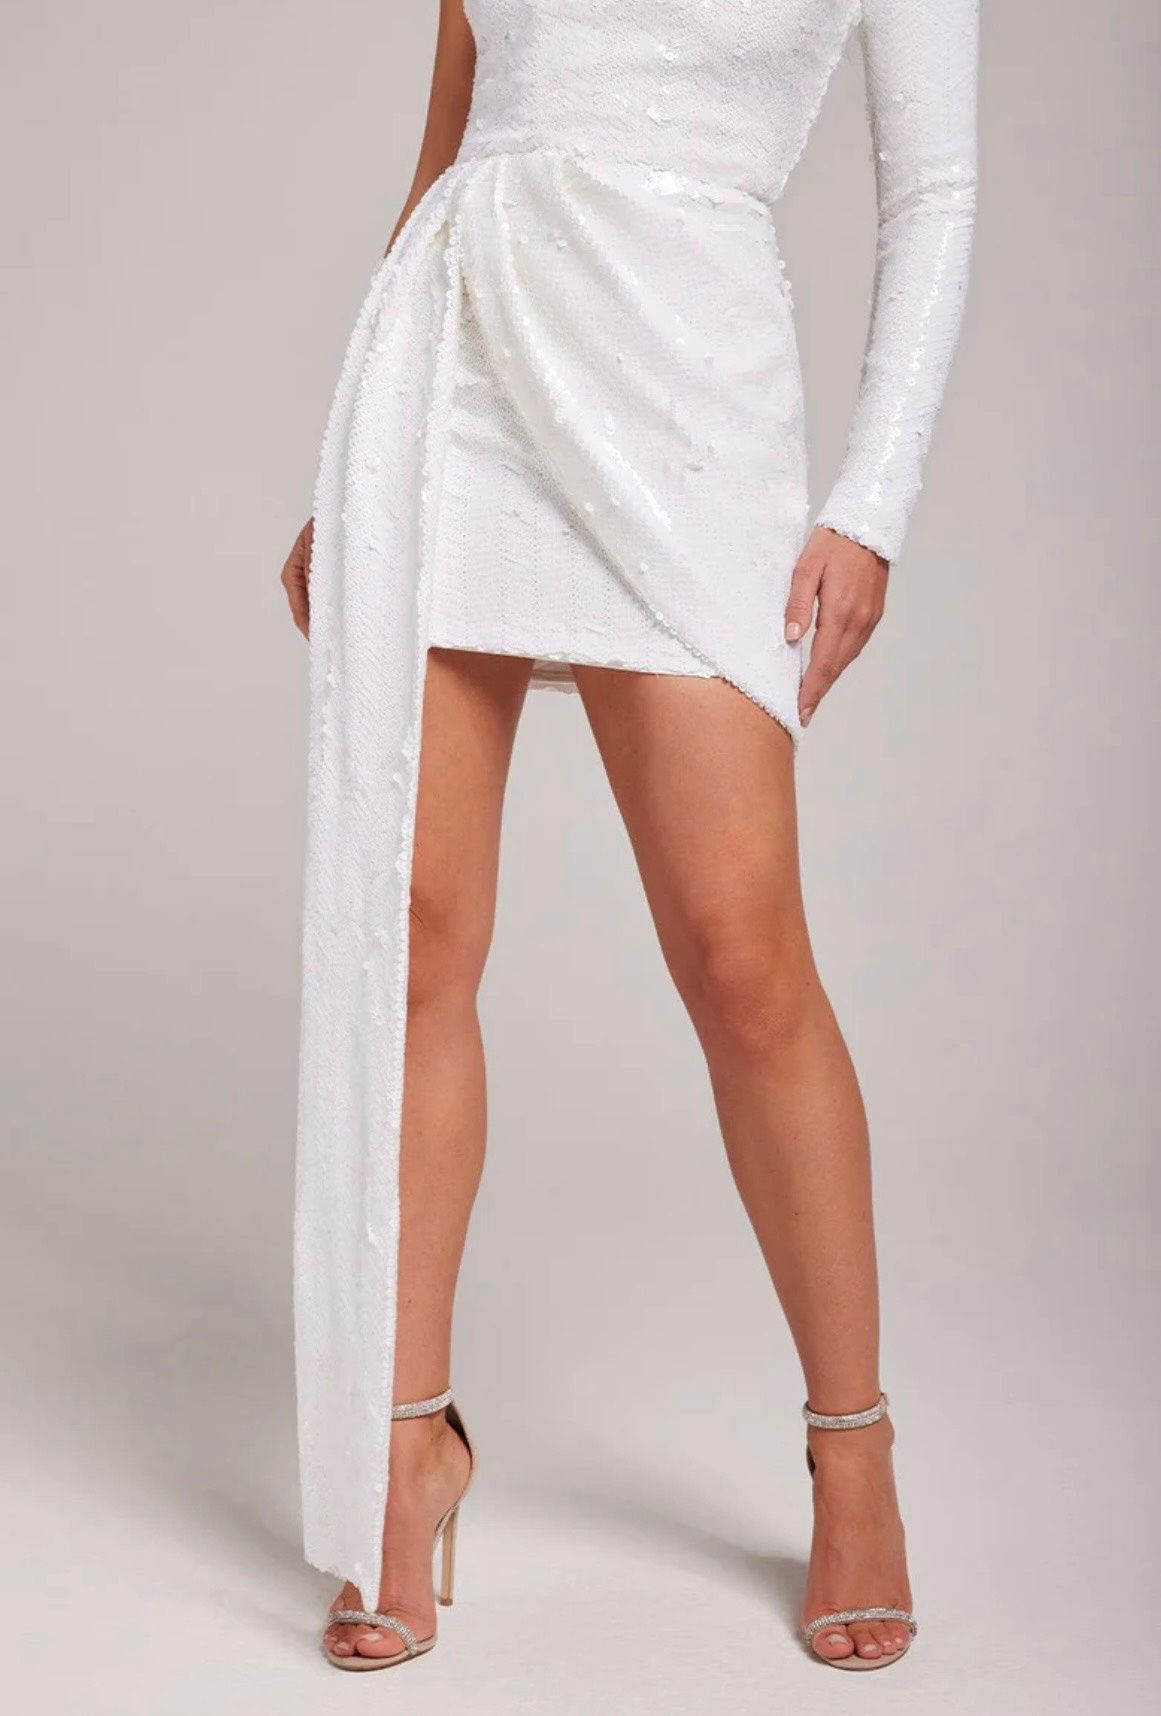 Nadine Merabi Size 2 Prom White Cocktail Dress on Queenly